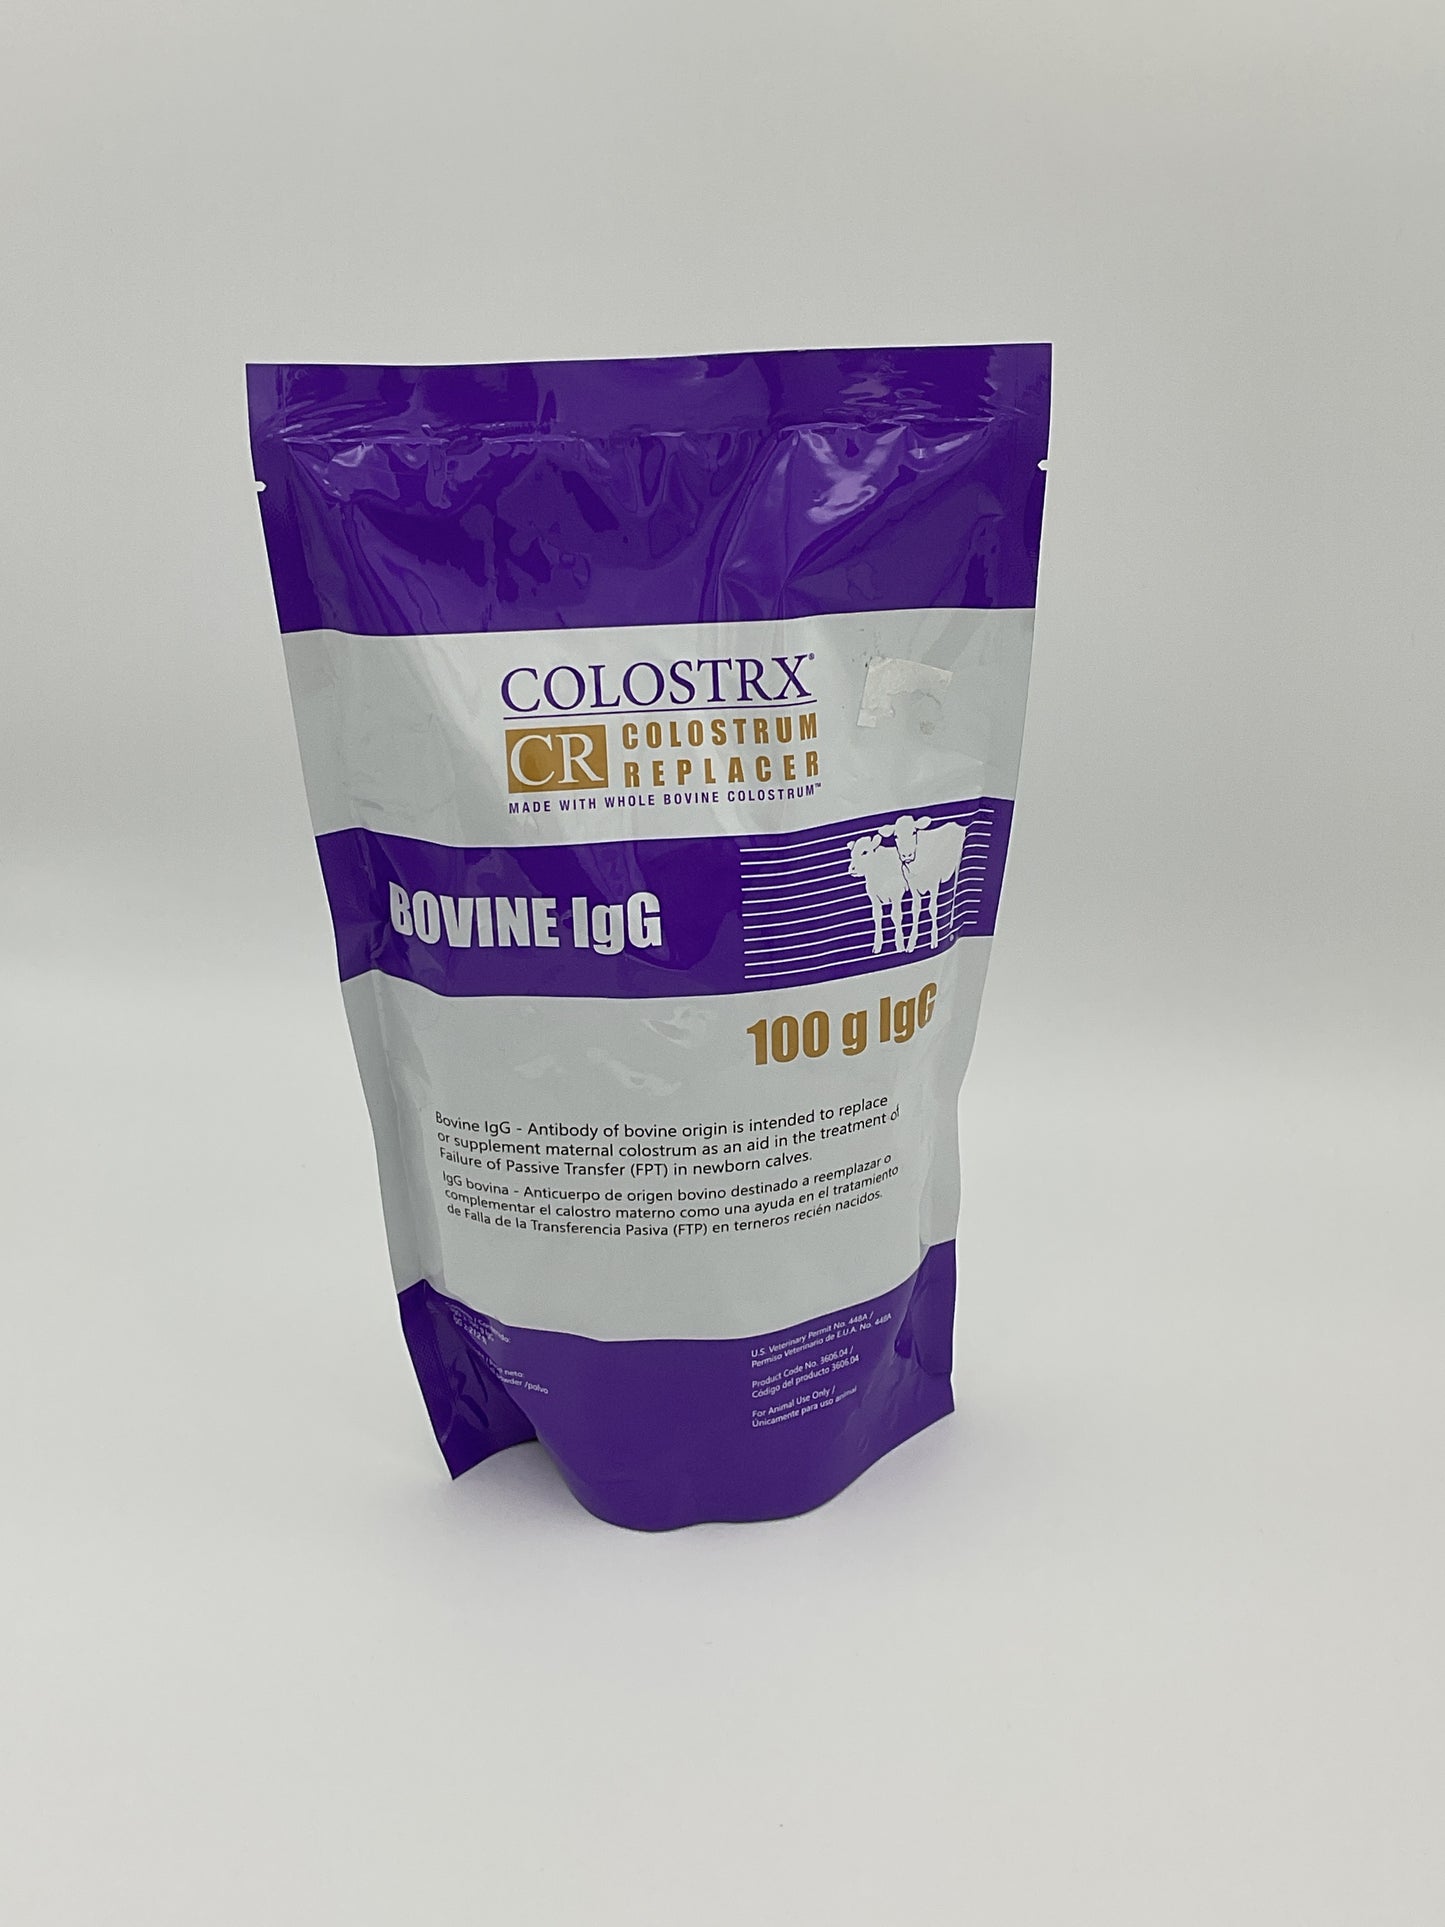 Colostrx Colostrum Replacer